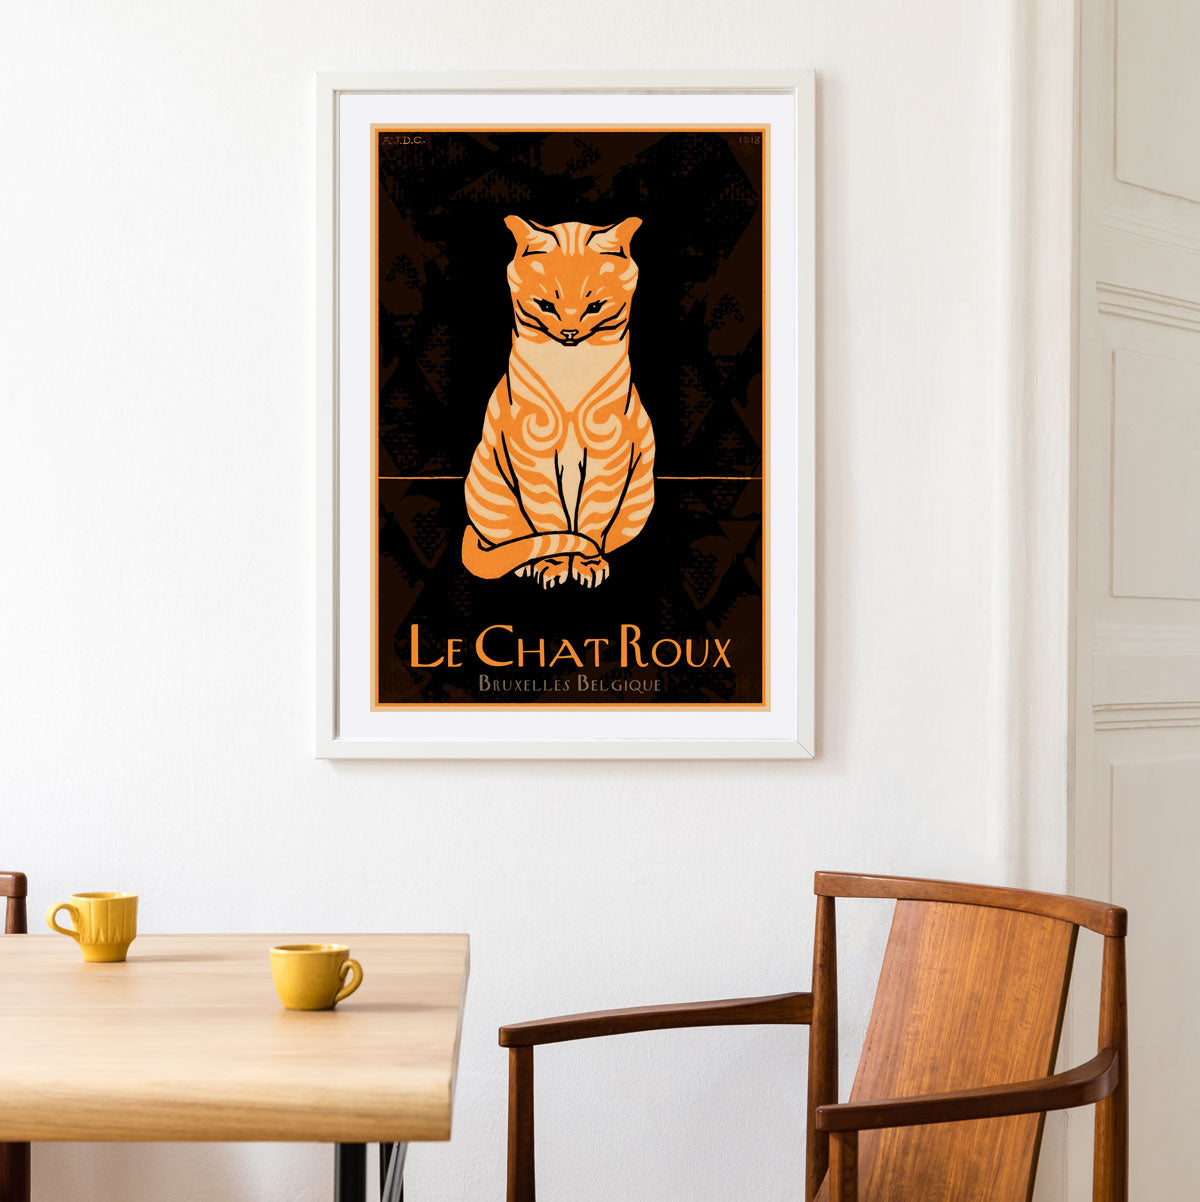 Le Chat Roux vintage print from Places We Luv